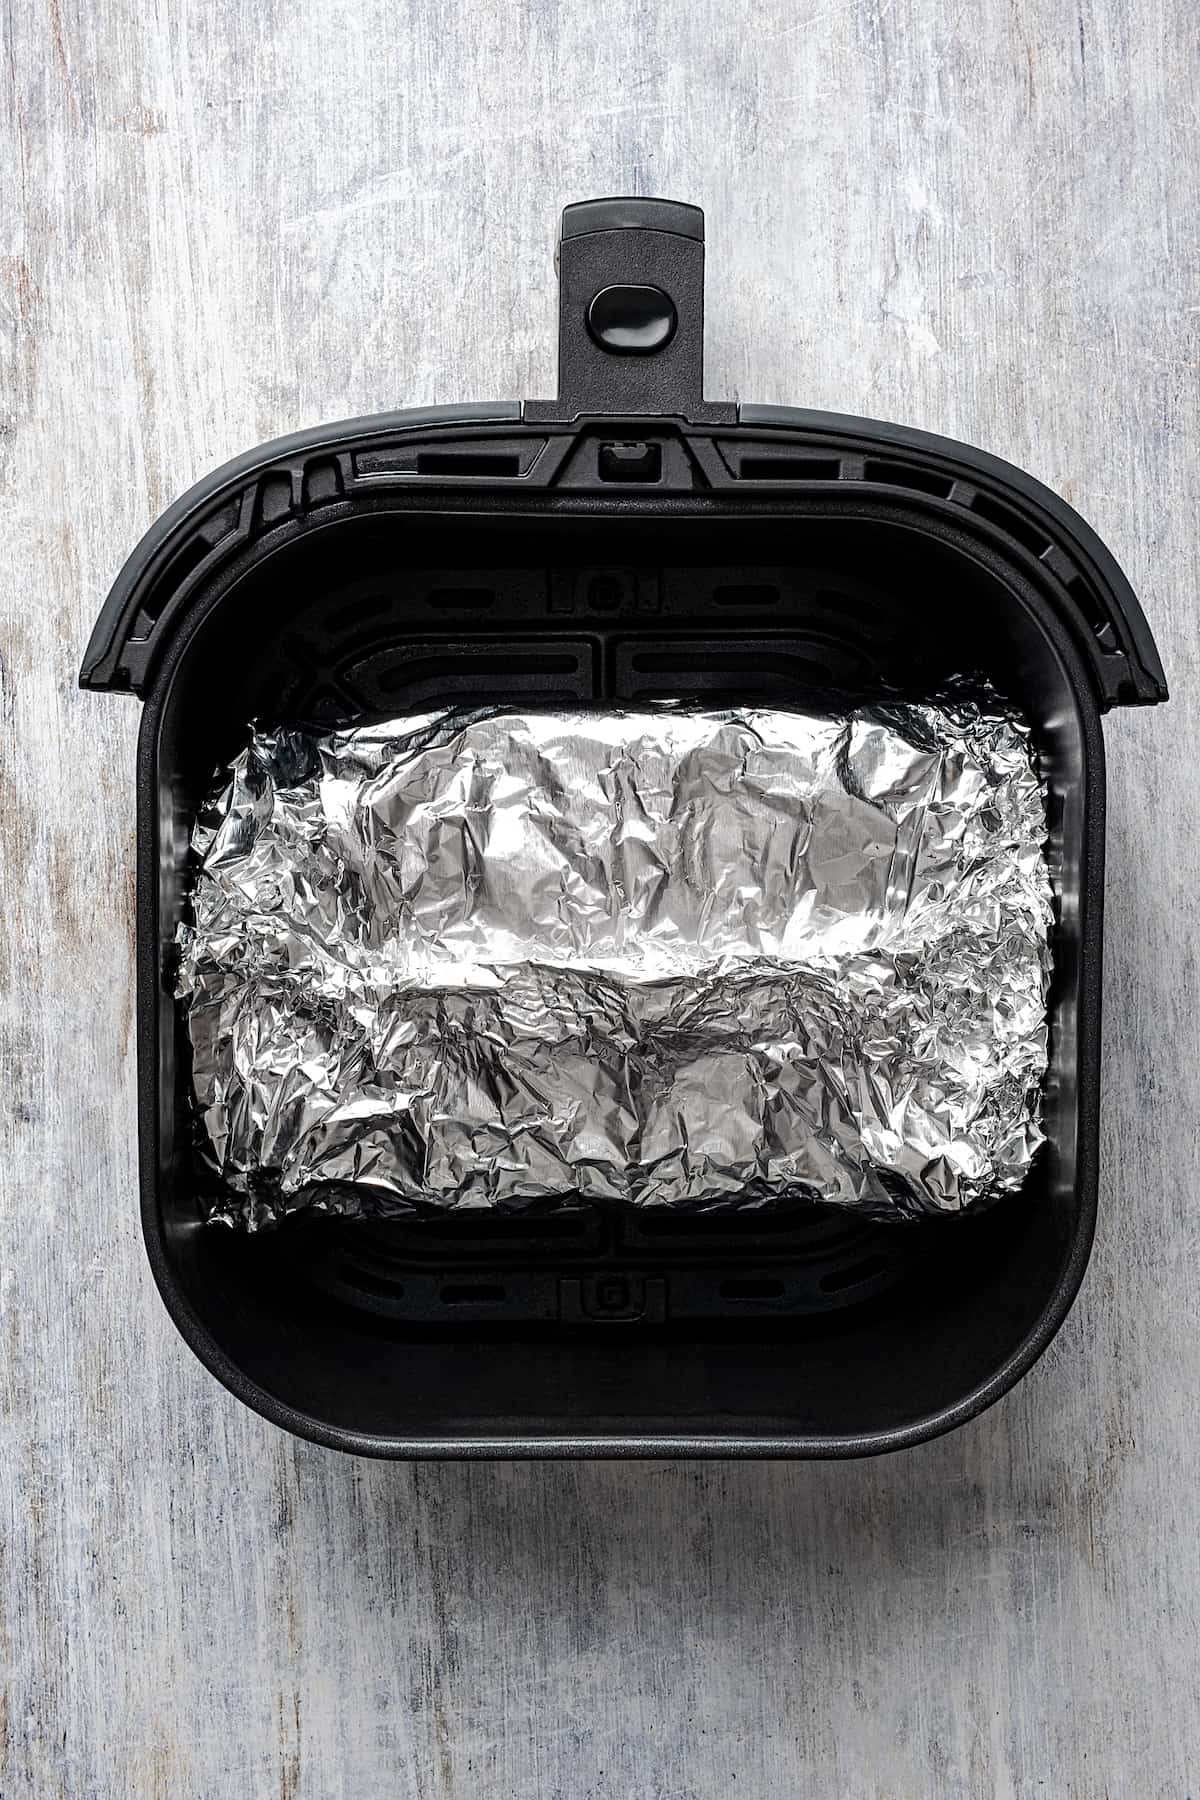 A foil-wrapped brisket in the air fryer.